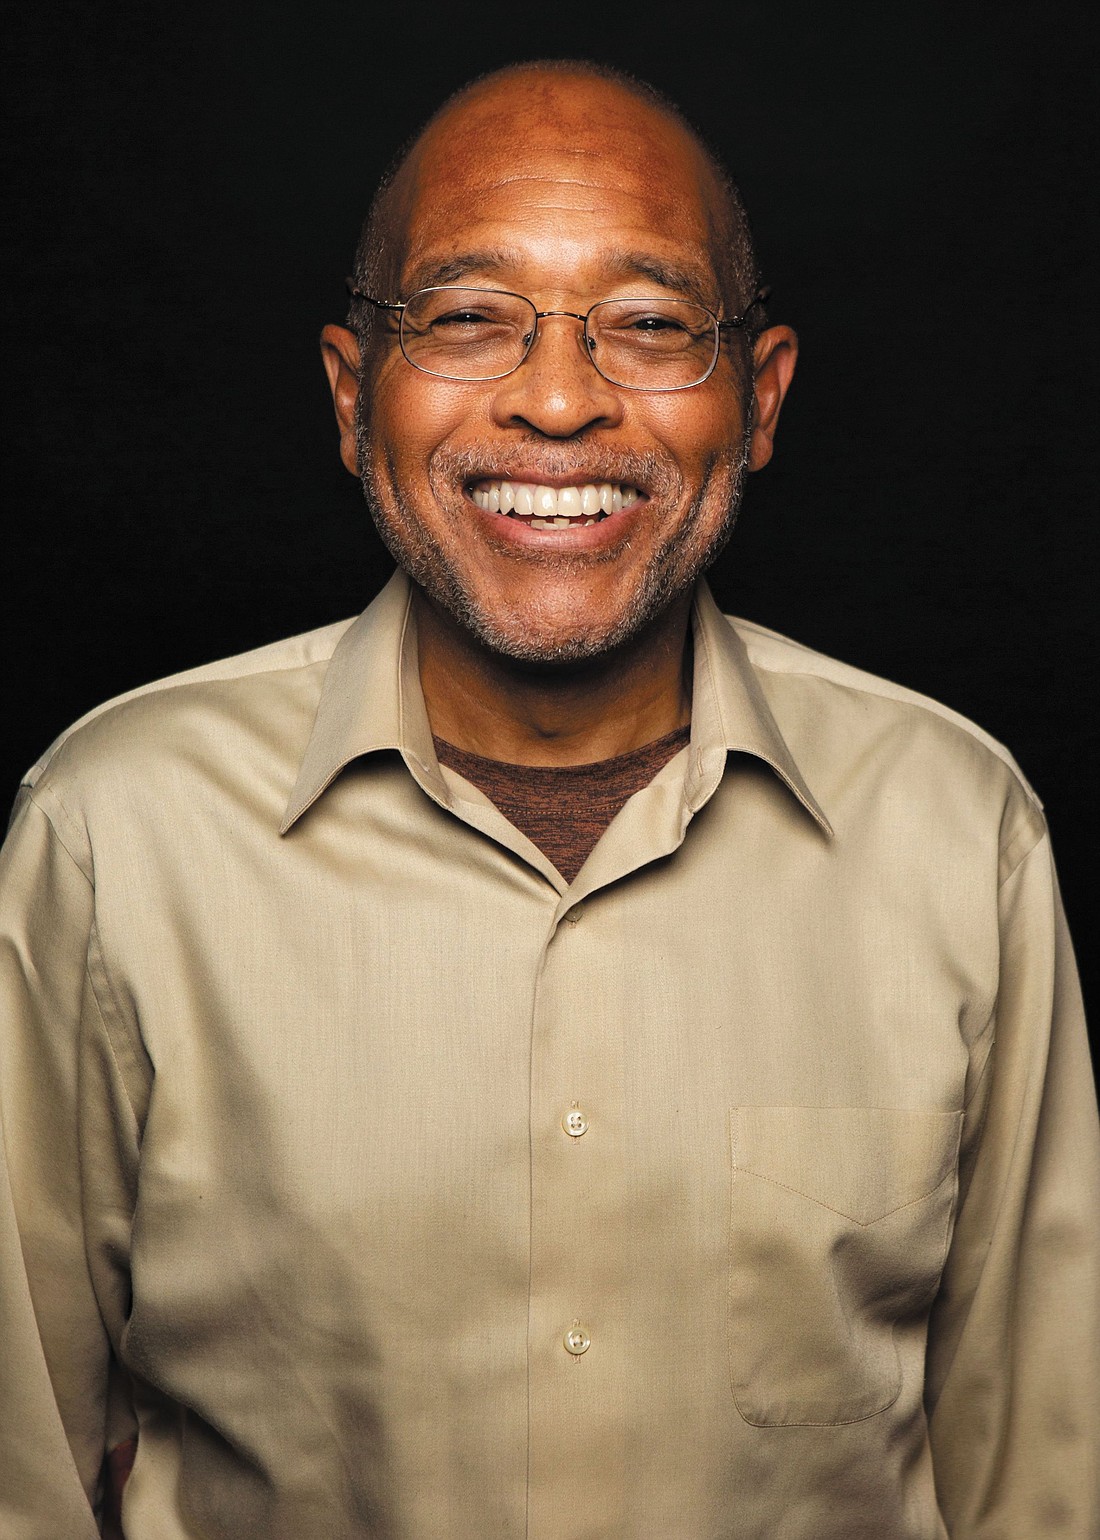 Bellingham-based author Clyde  Ford’s memoir “Think Black” centers on his trailblazing father John Stanley Ford, the first Black software engineer at IBM. The book is Whatcom County Library System's Read & Share selection for 2022. Virtual workshops and book talks take place Oct. 8 through Nov. 10.